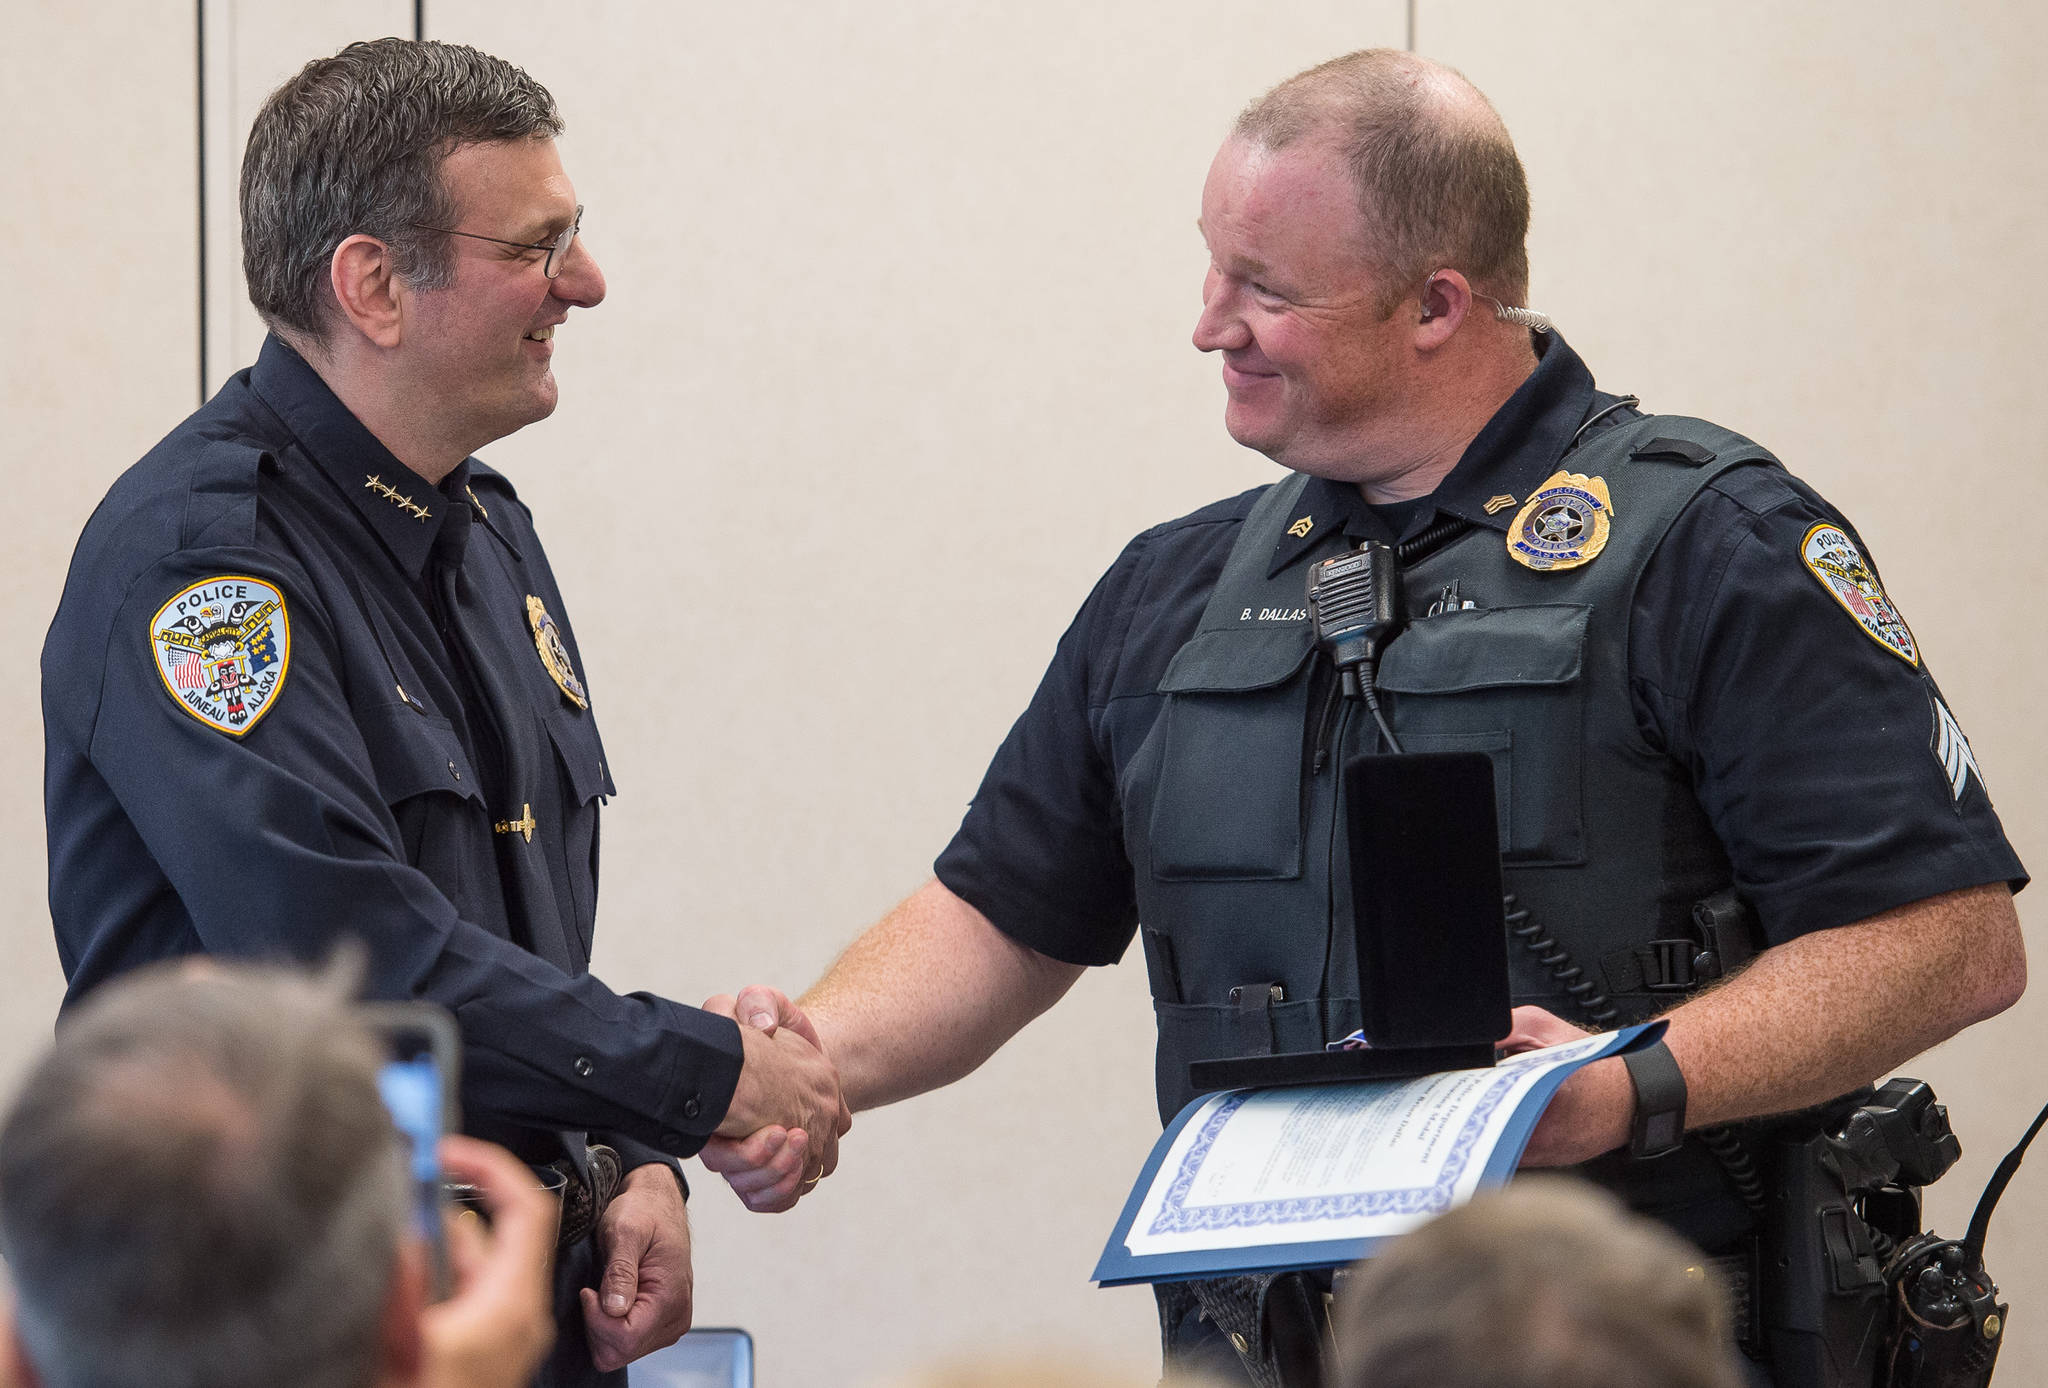 Juneau Chief of Police Bryce Johnson, left, hands out a Lifesaving Award to Officer Brian Dallas during the Juneau Police Department’s quarterly awards ceremony on Monday, July 24, 2017. Juneau Chief of Police Bryce Johnson, left, hands out a Lifesaving Award to Officer Brian Dallas during the Juneau Police Department’s quarterly awards ceremony on Monday, July 24, 2017.